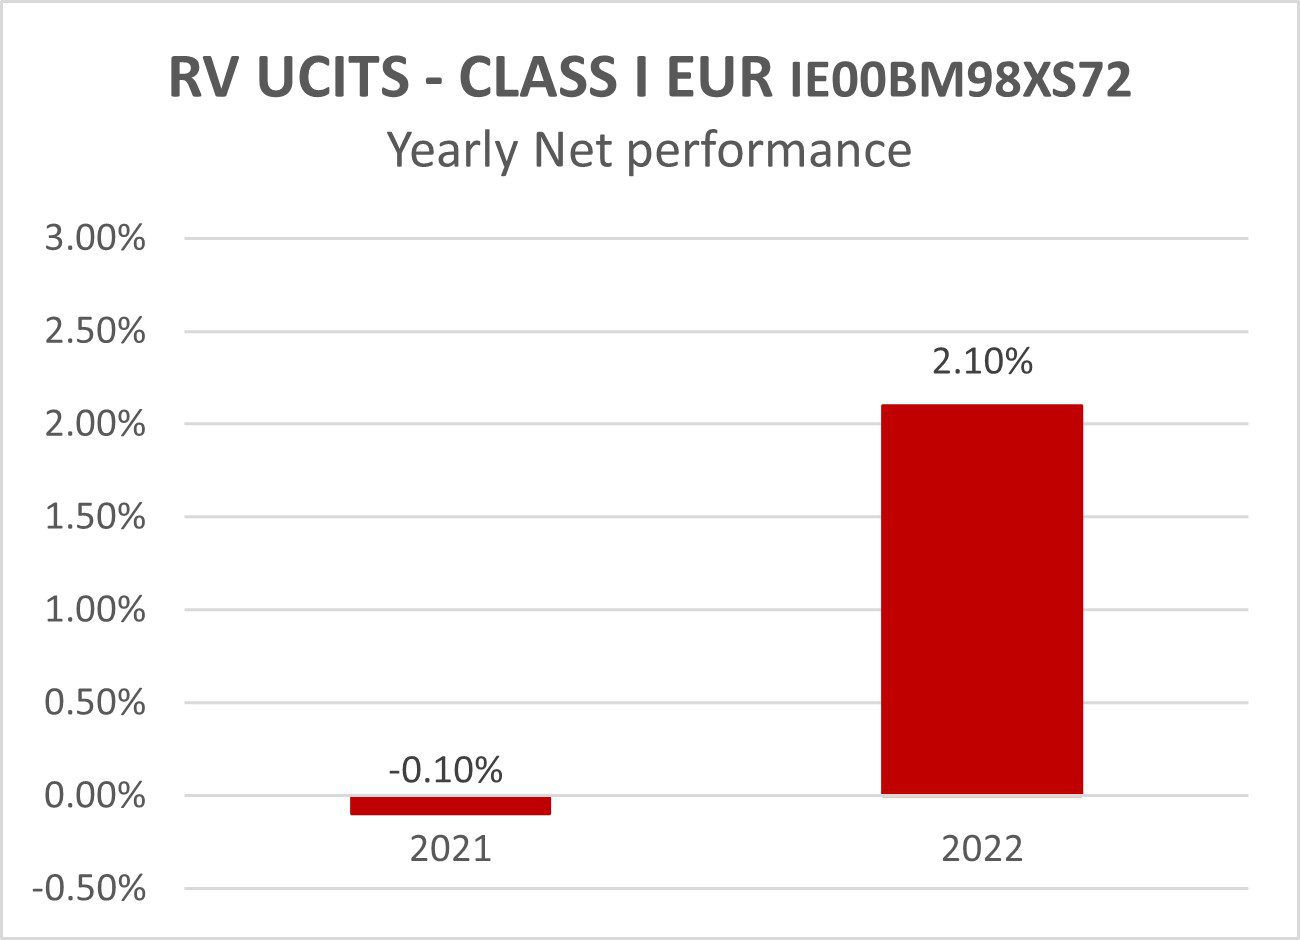 RV UCITS - CLASS I EUR IE00BM98XS72 -Yearly Net performance